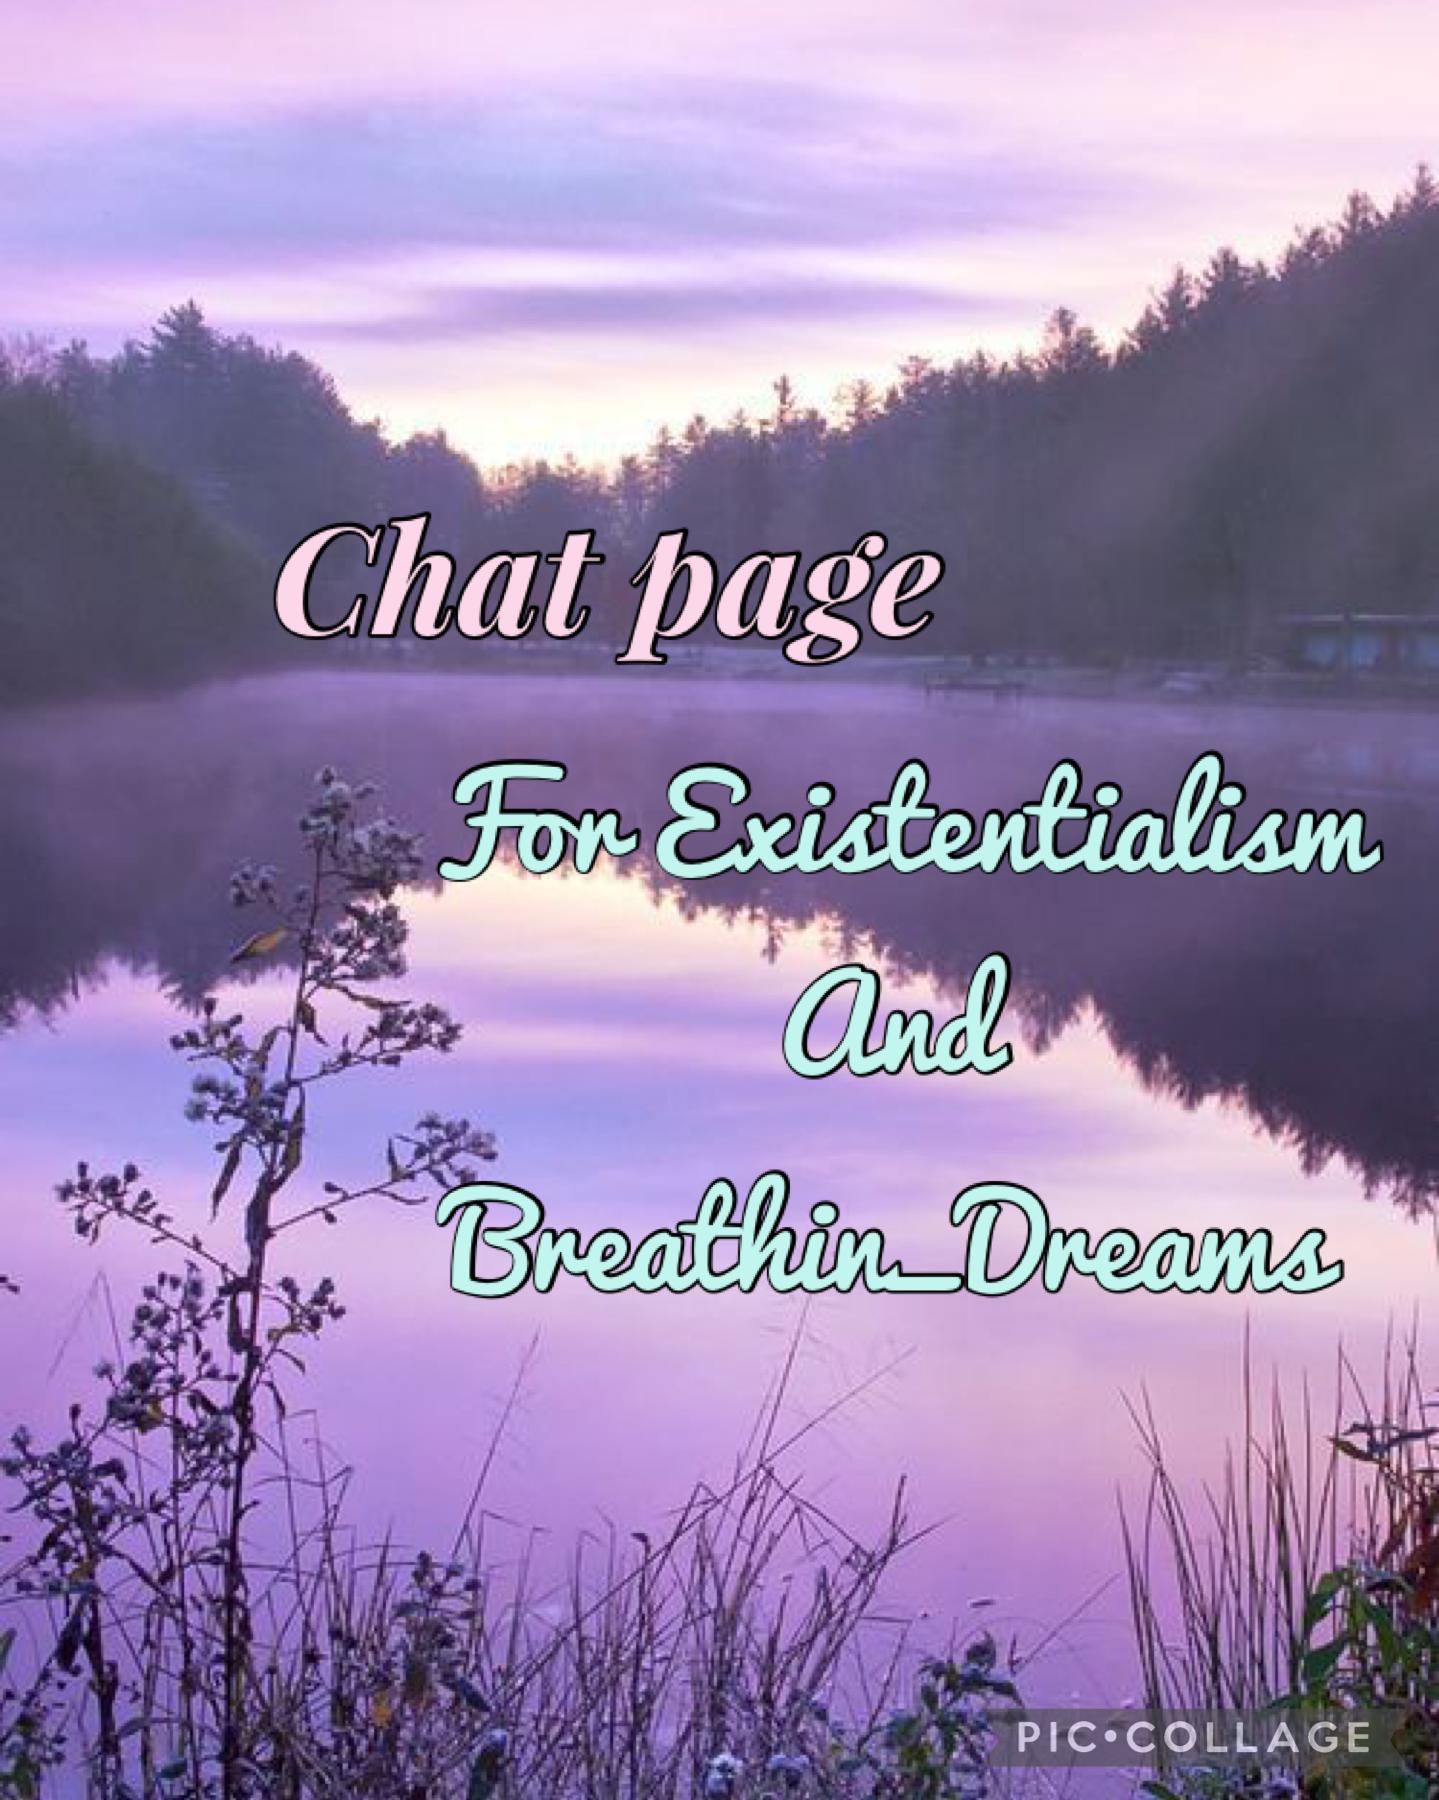 15.6.22 Chat page with existentialism 